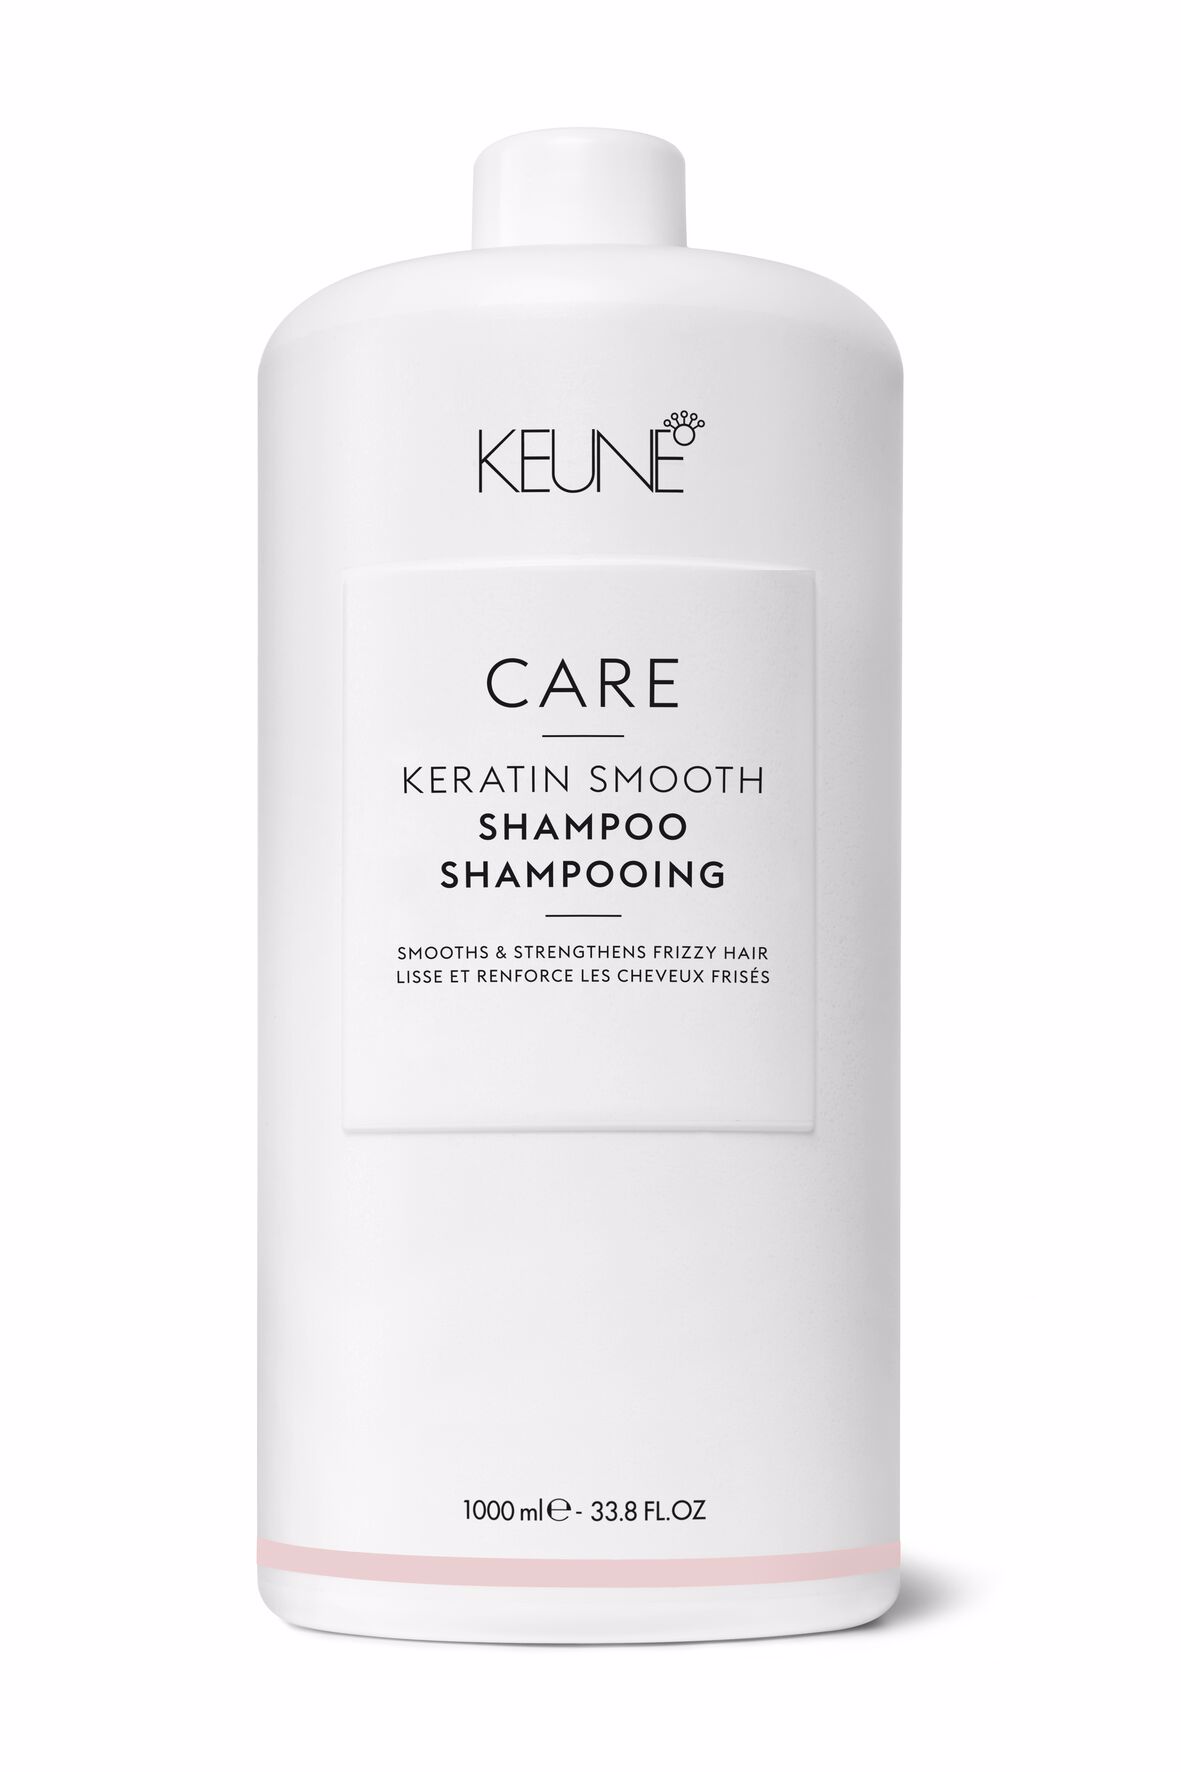 Dreaming of smooth, anti-frizz hair? Try our Keratin Smooth Shampoo. This hair product nurtures, moisturizes, and strengthens dry hair. Available on keune.ch.